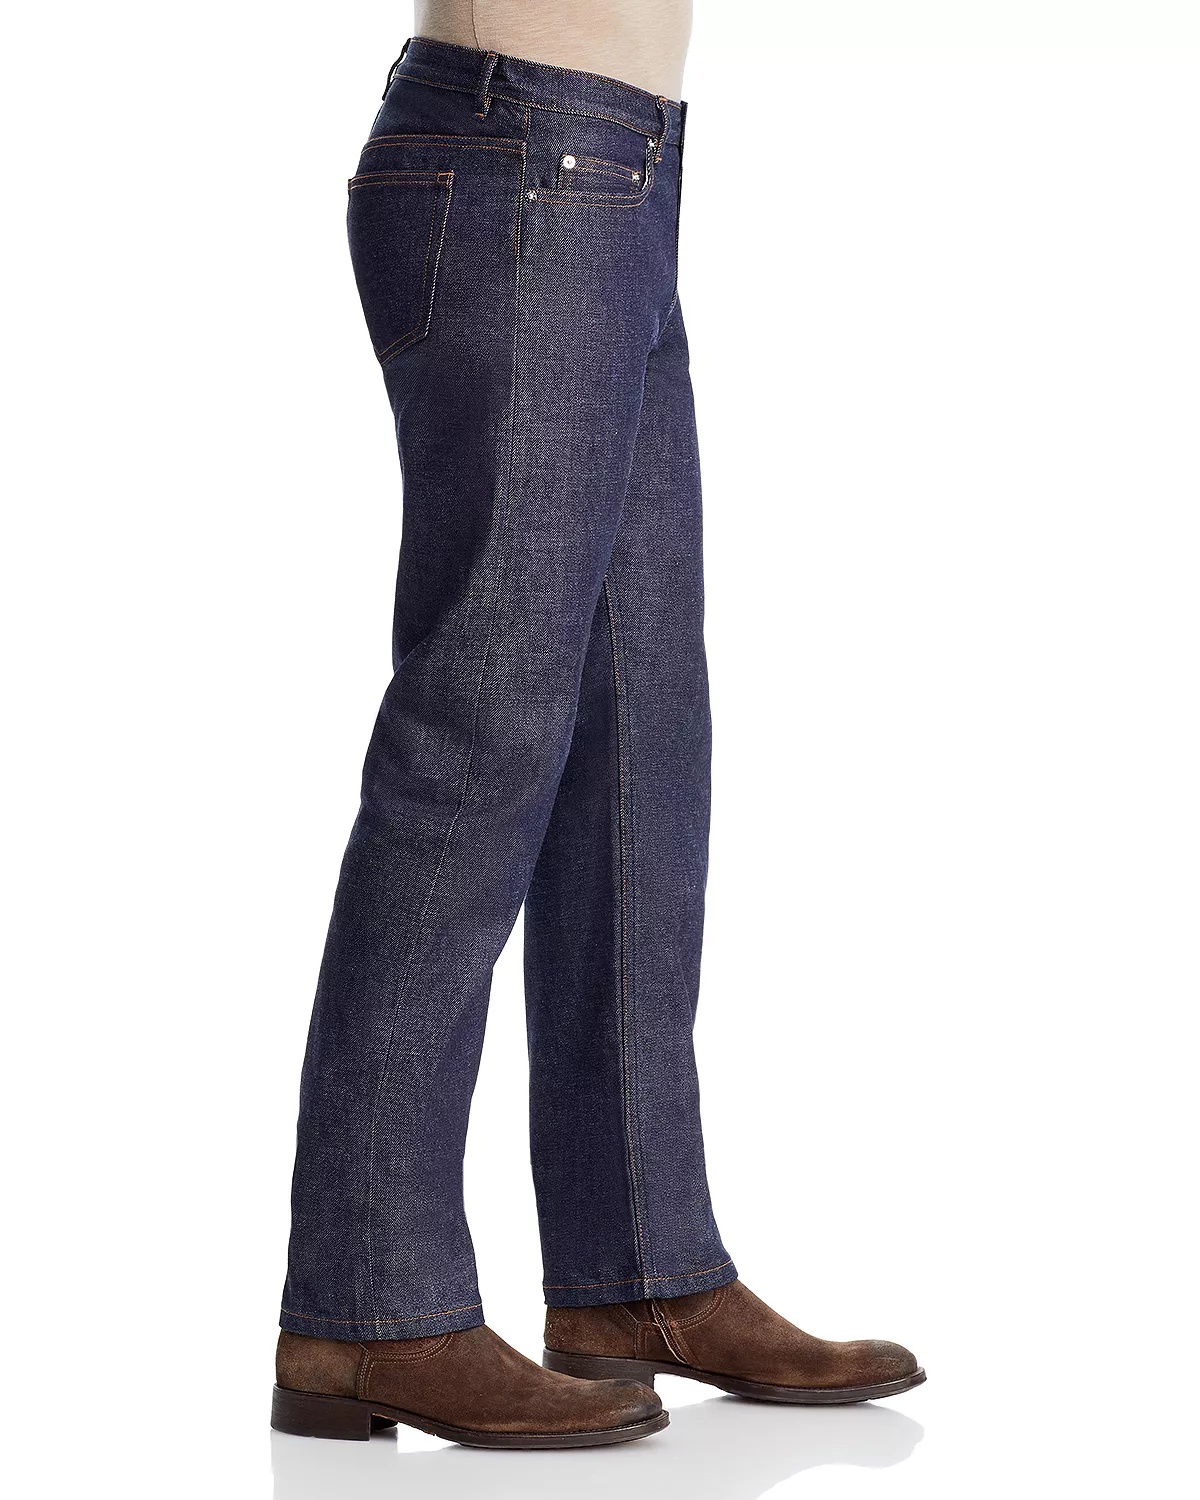 New Standard Straight Fit Jeans in Indigo - 4